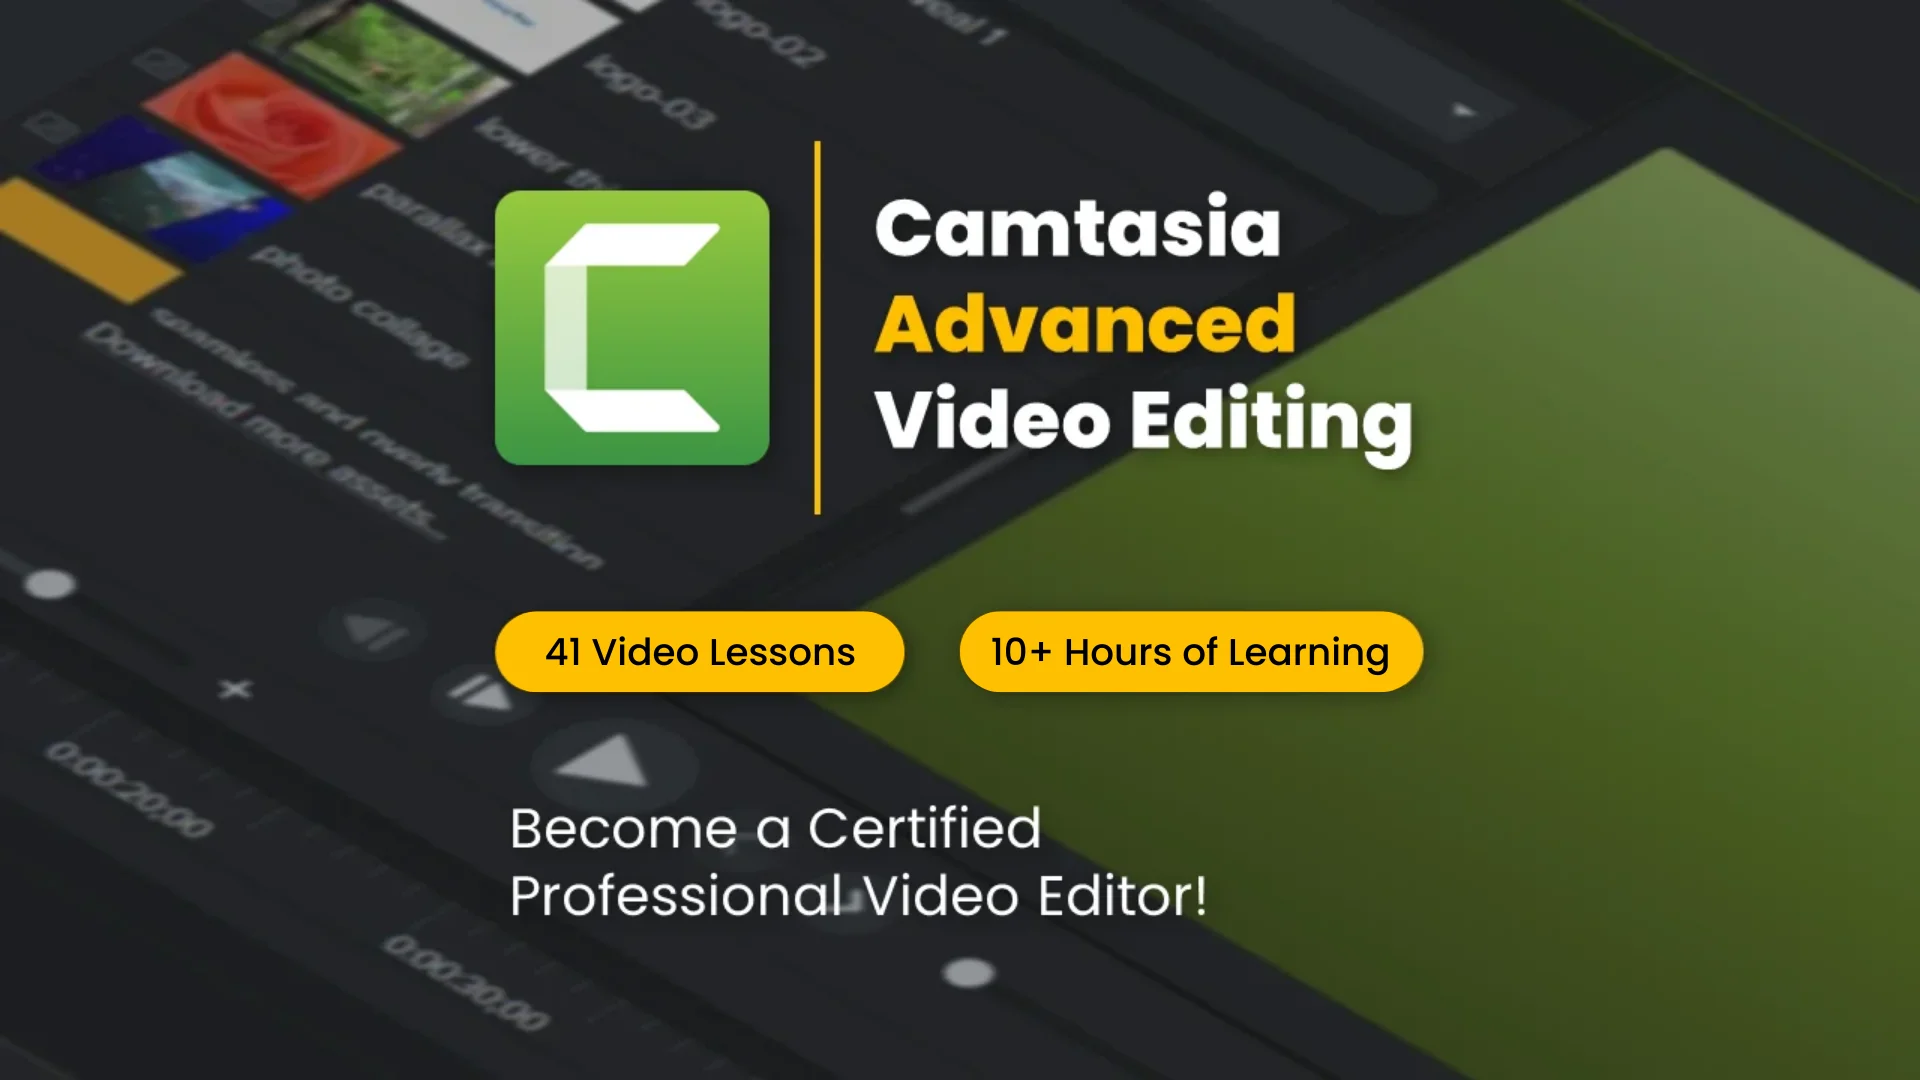 Camtasia Advanced Video Editing Online Course in Bangladesh Featured Image